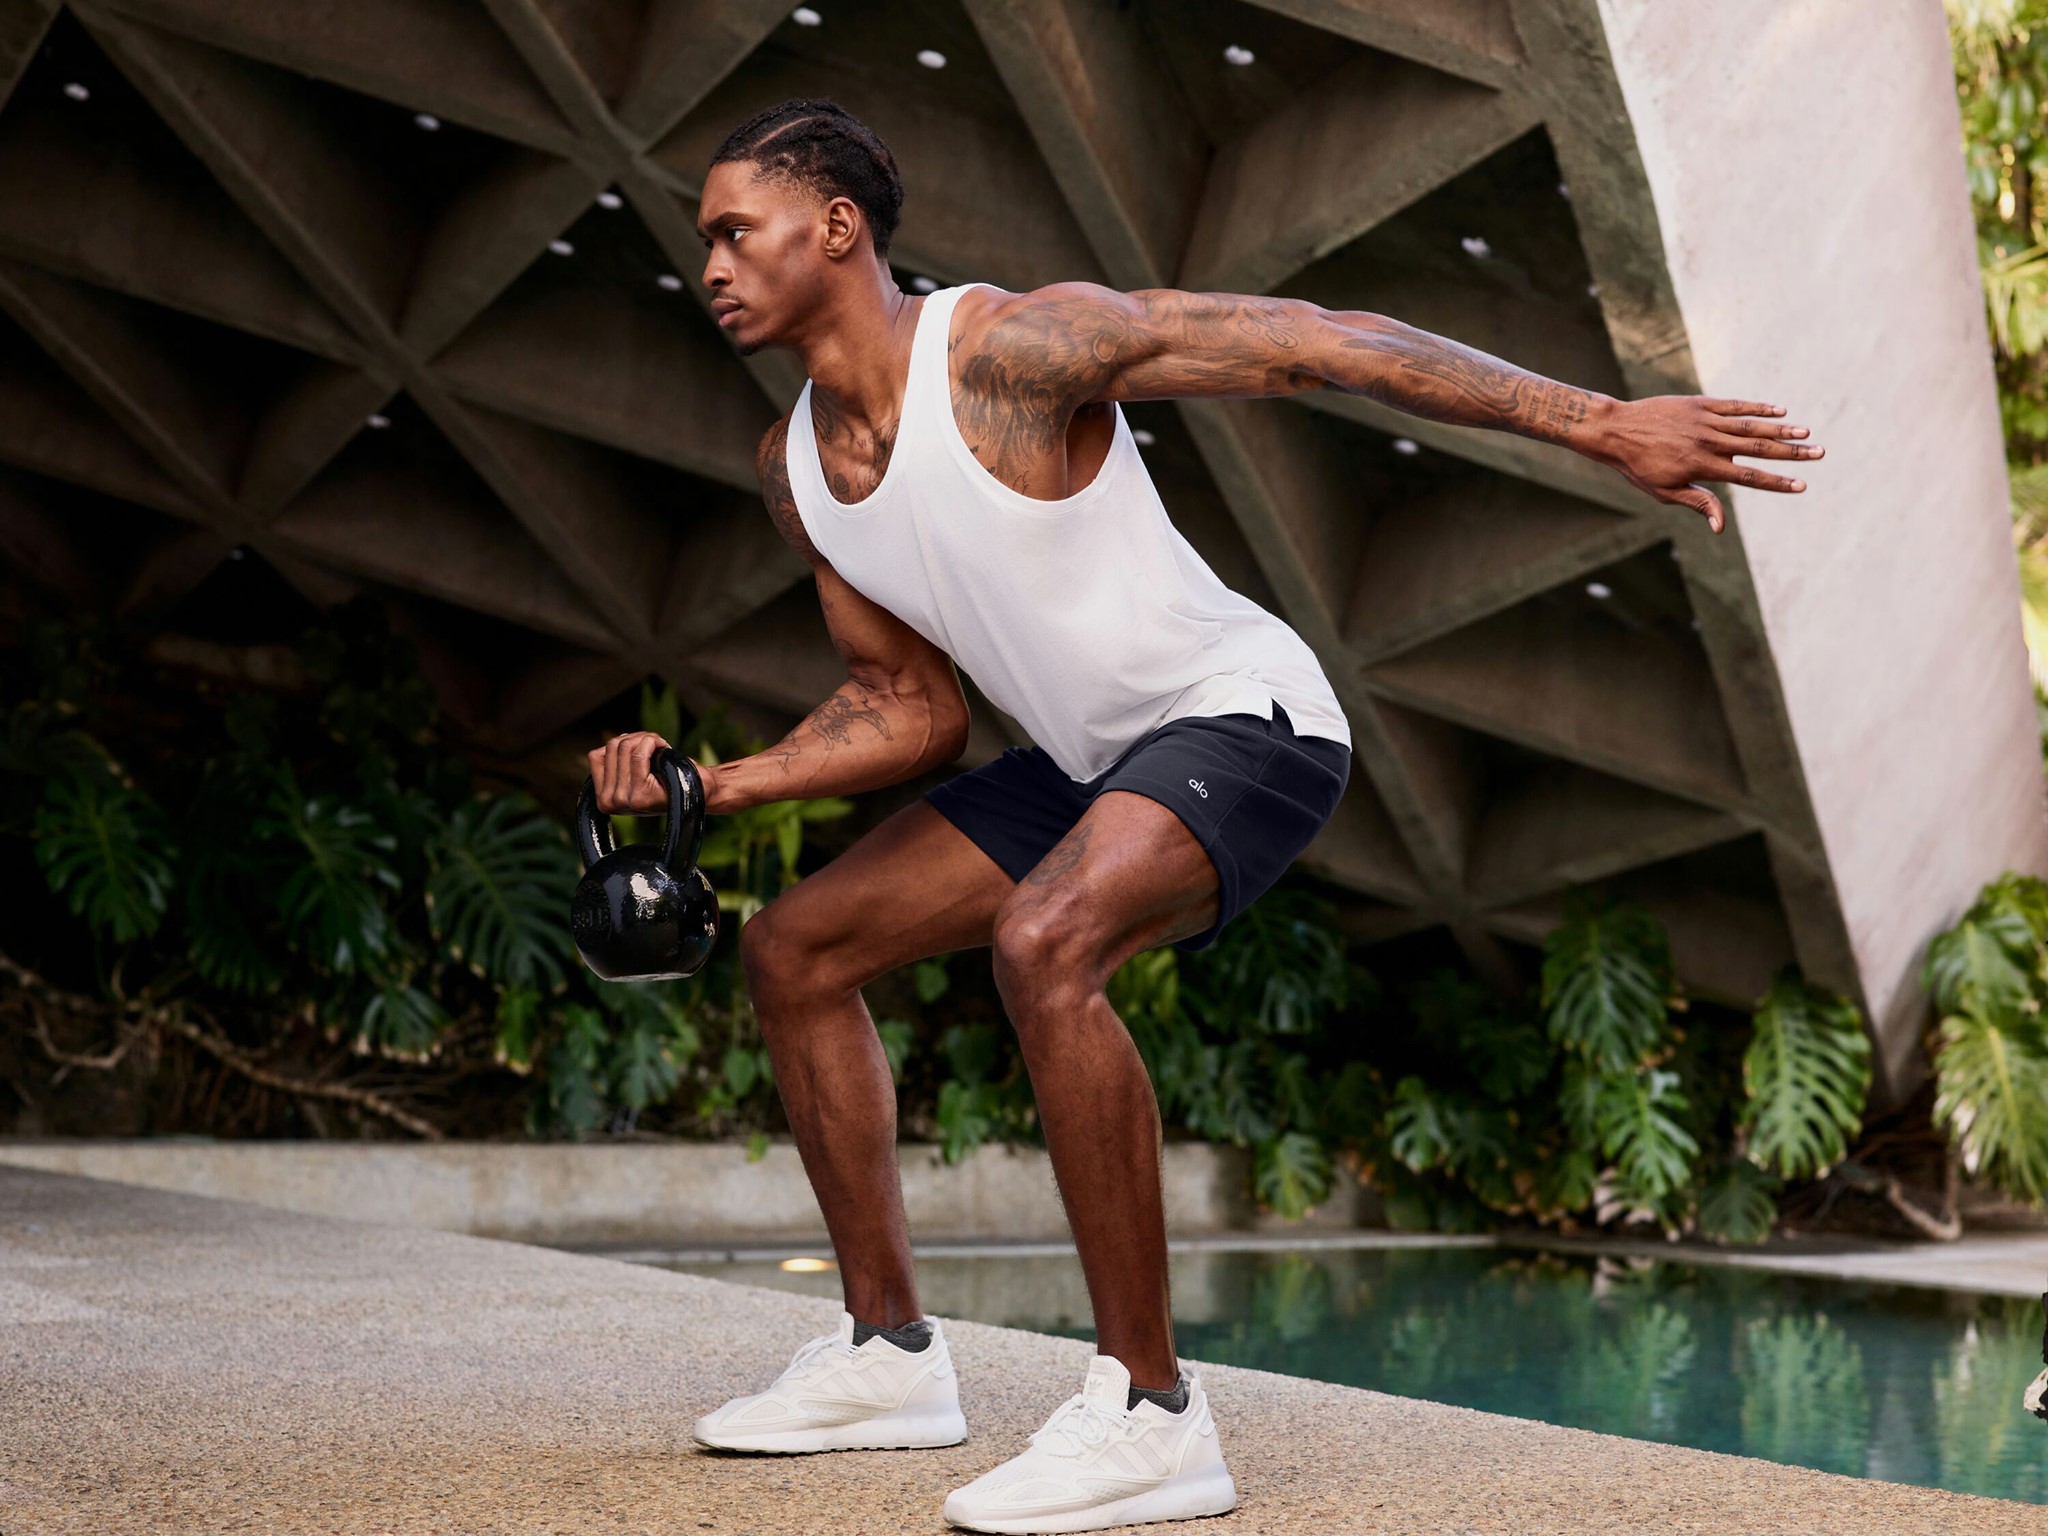 Yoga Clothing For Men: 10 Brands To Flex Into 2023 | Flipboard